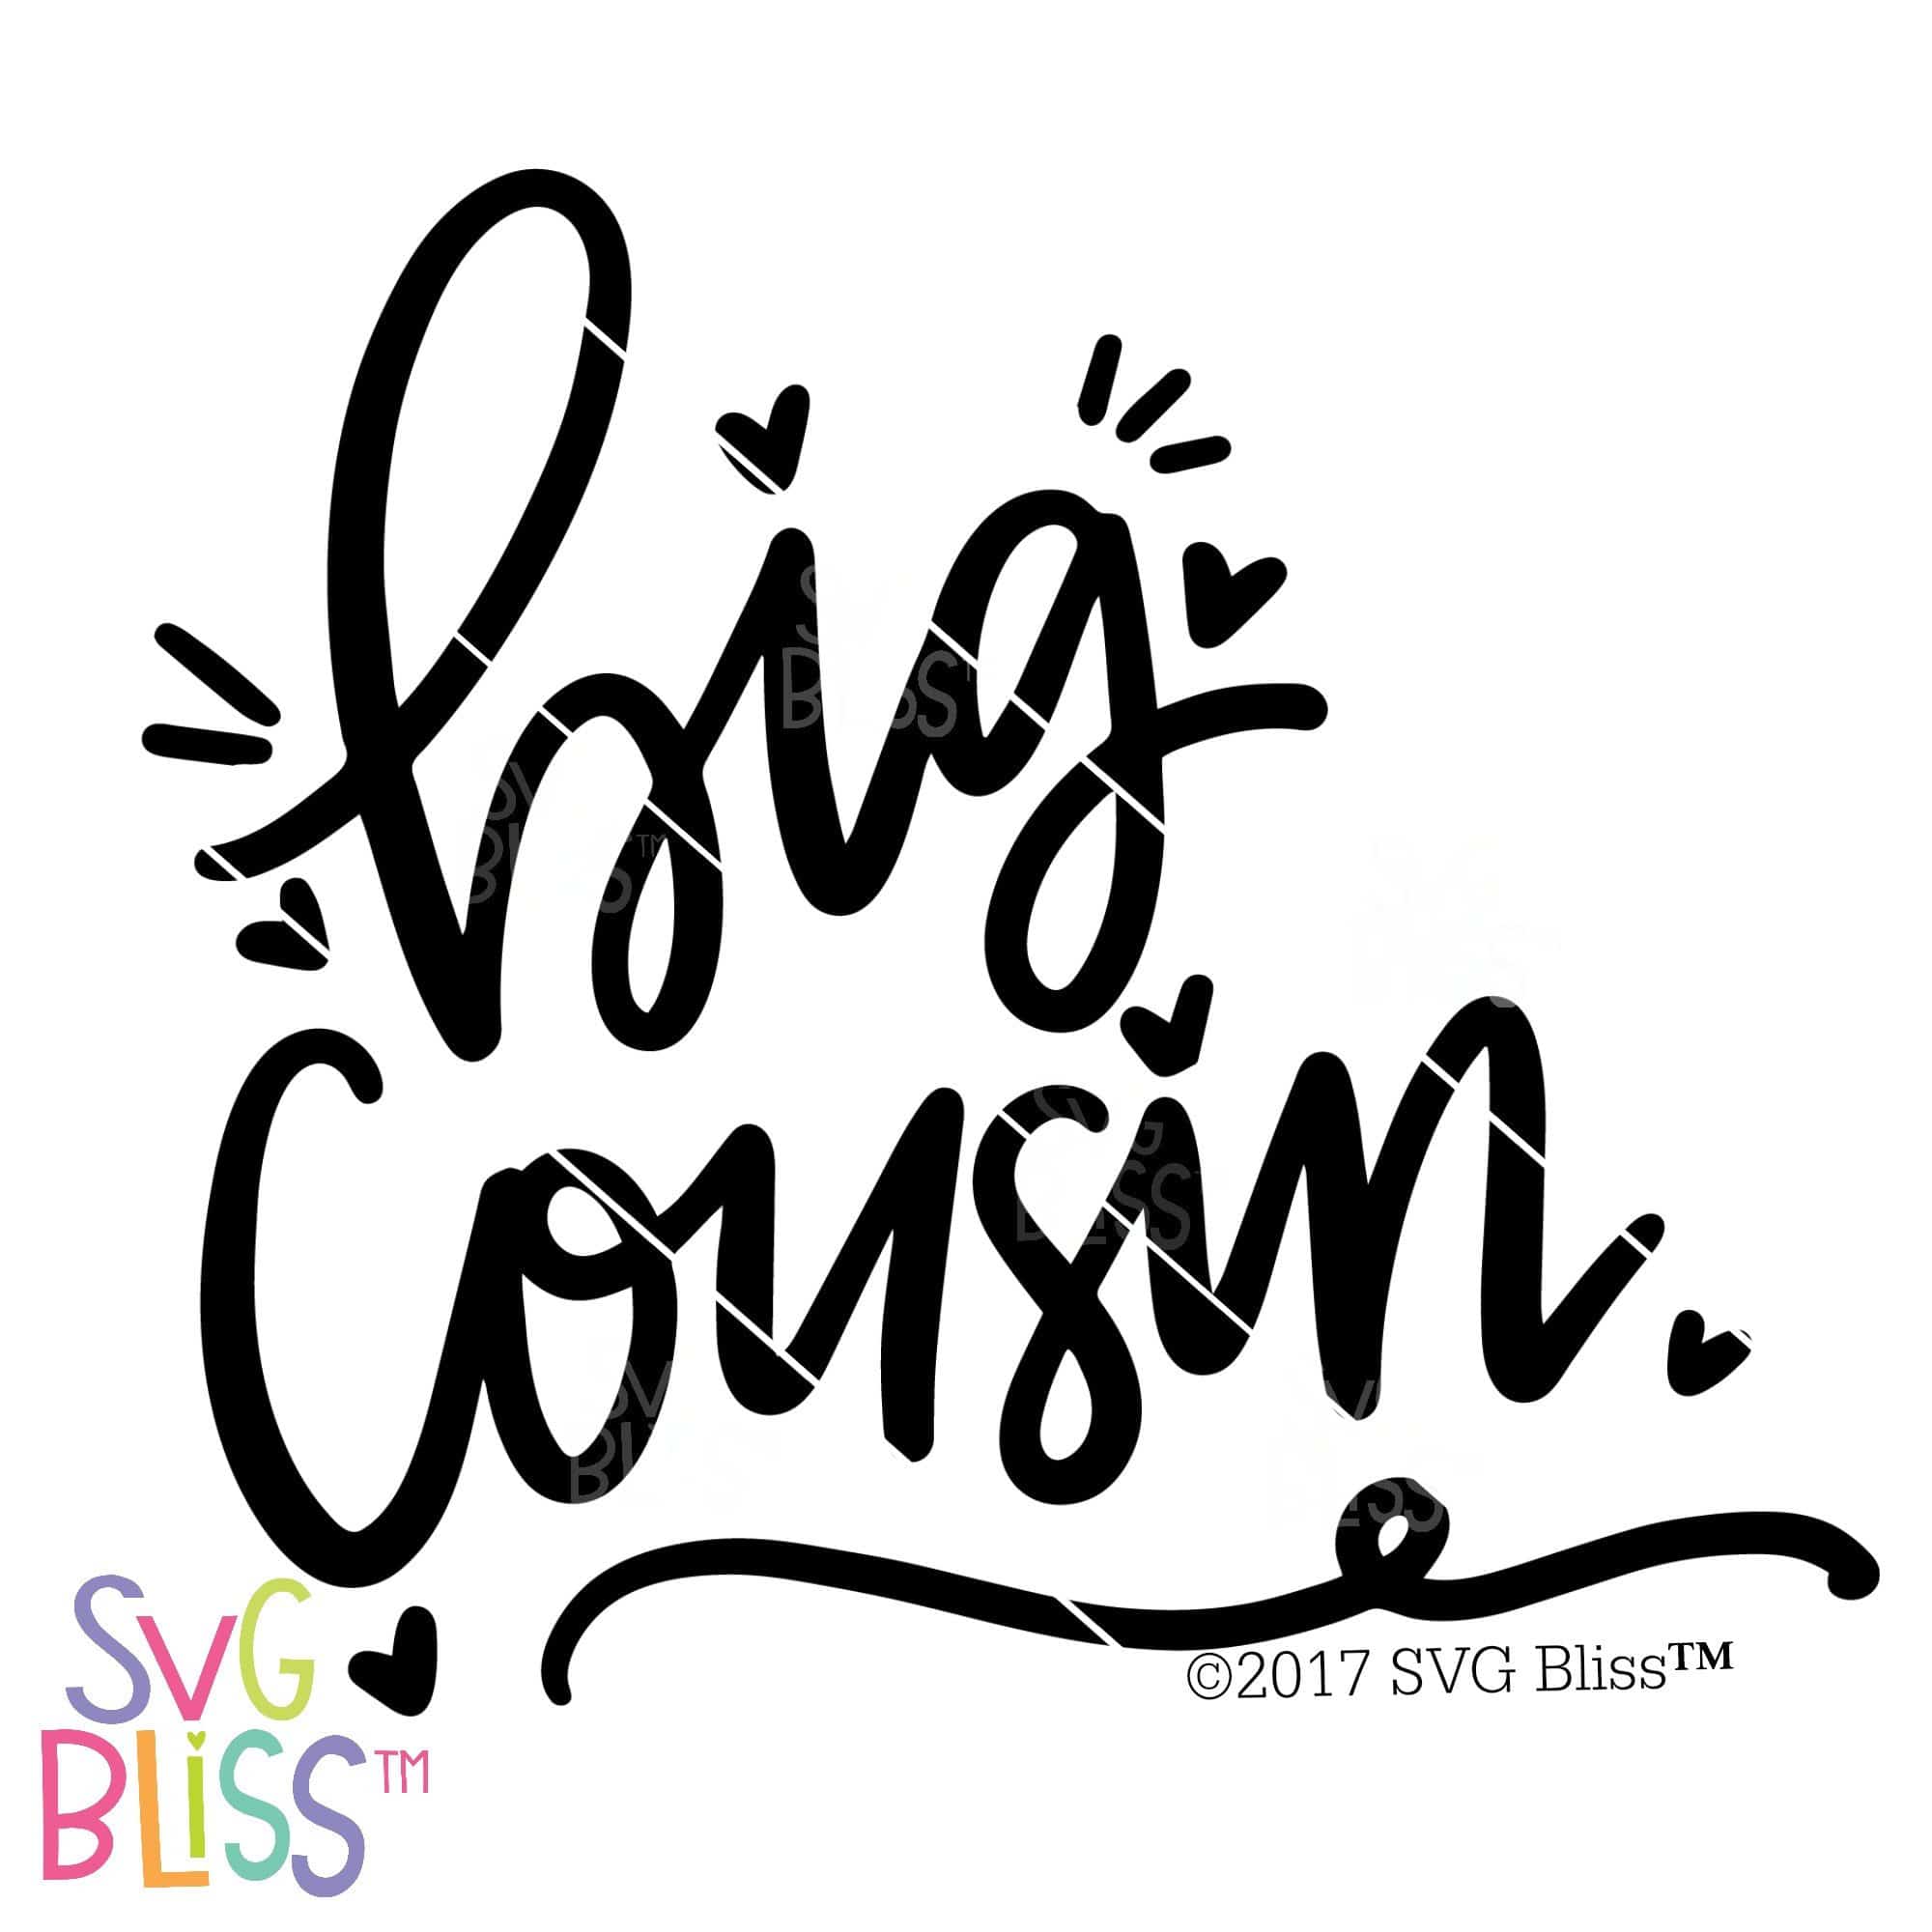 Download Big Cousin Svg Dxf Cutting File For Cricut Silhouette Svg Bliss